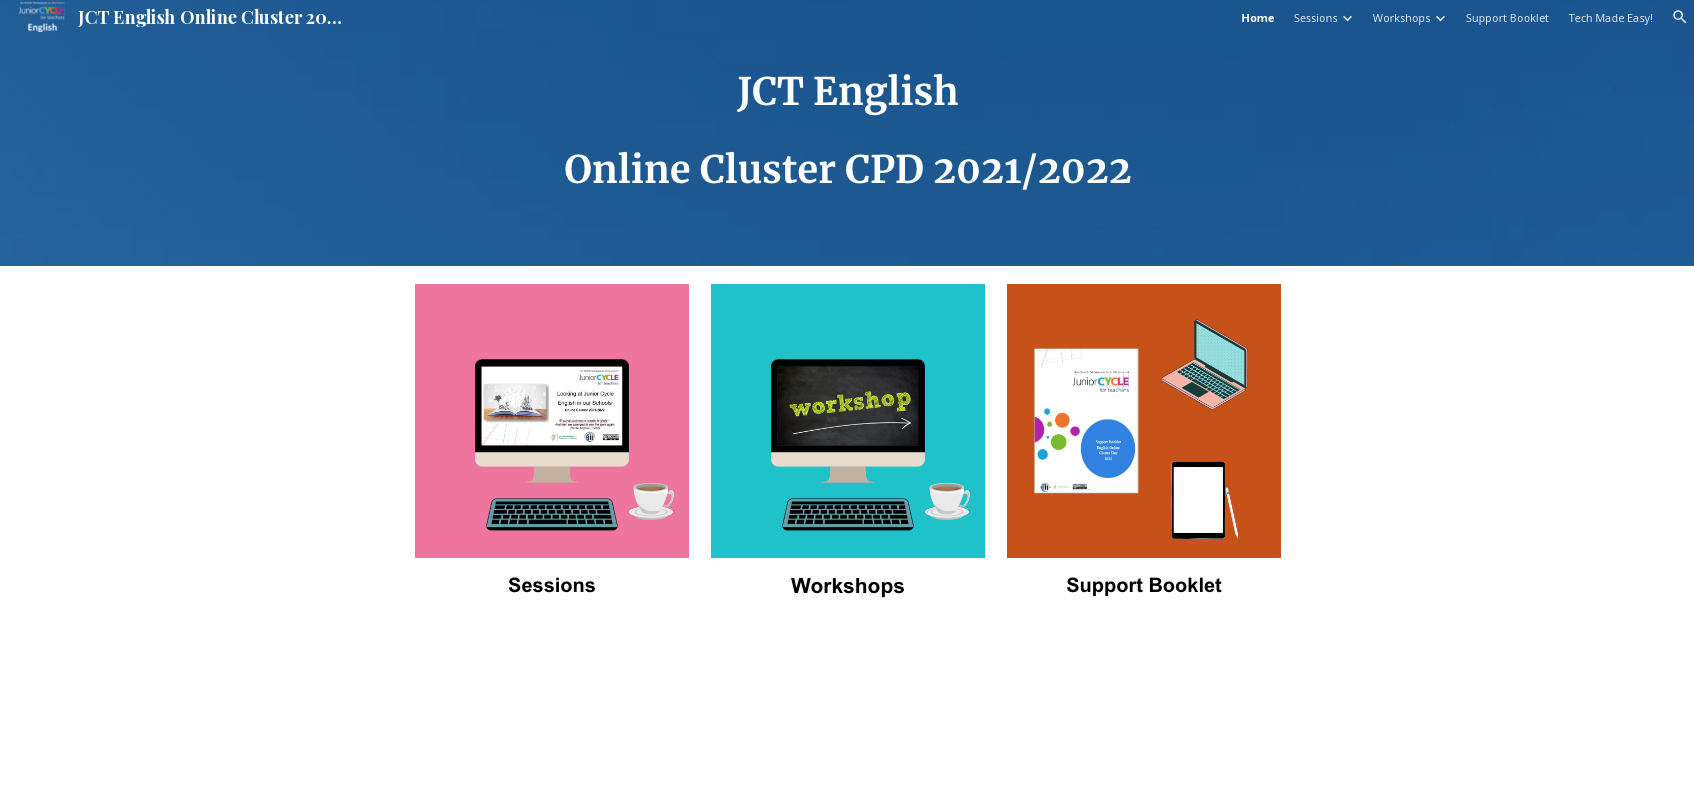 CPD Website for 2021/22